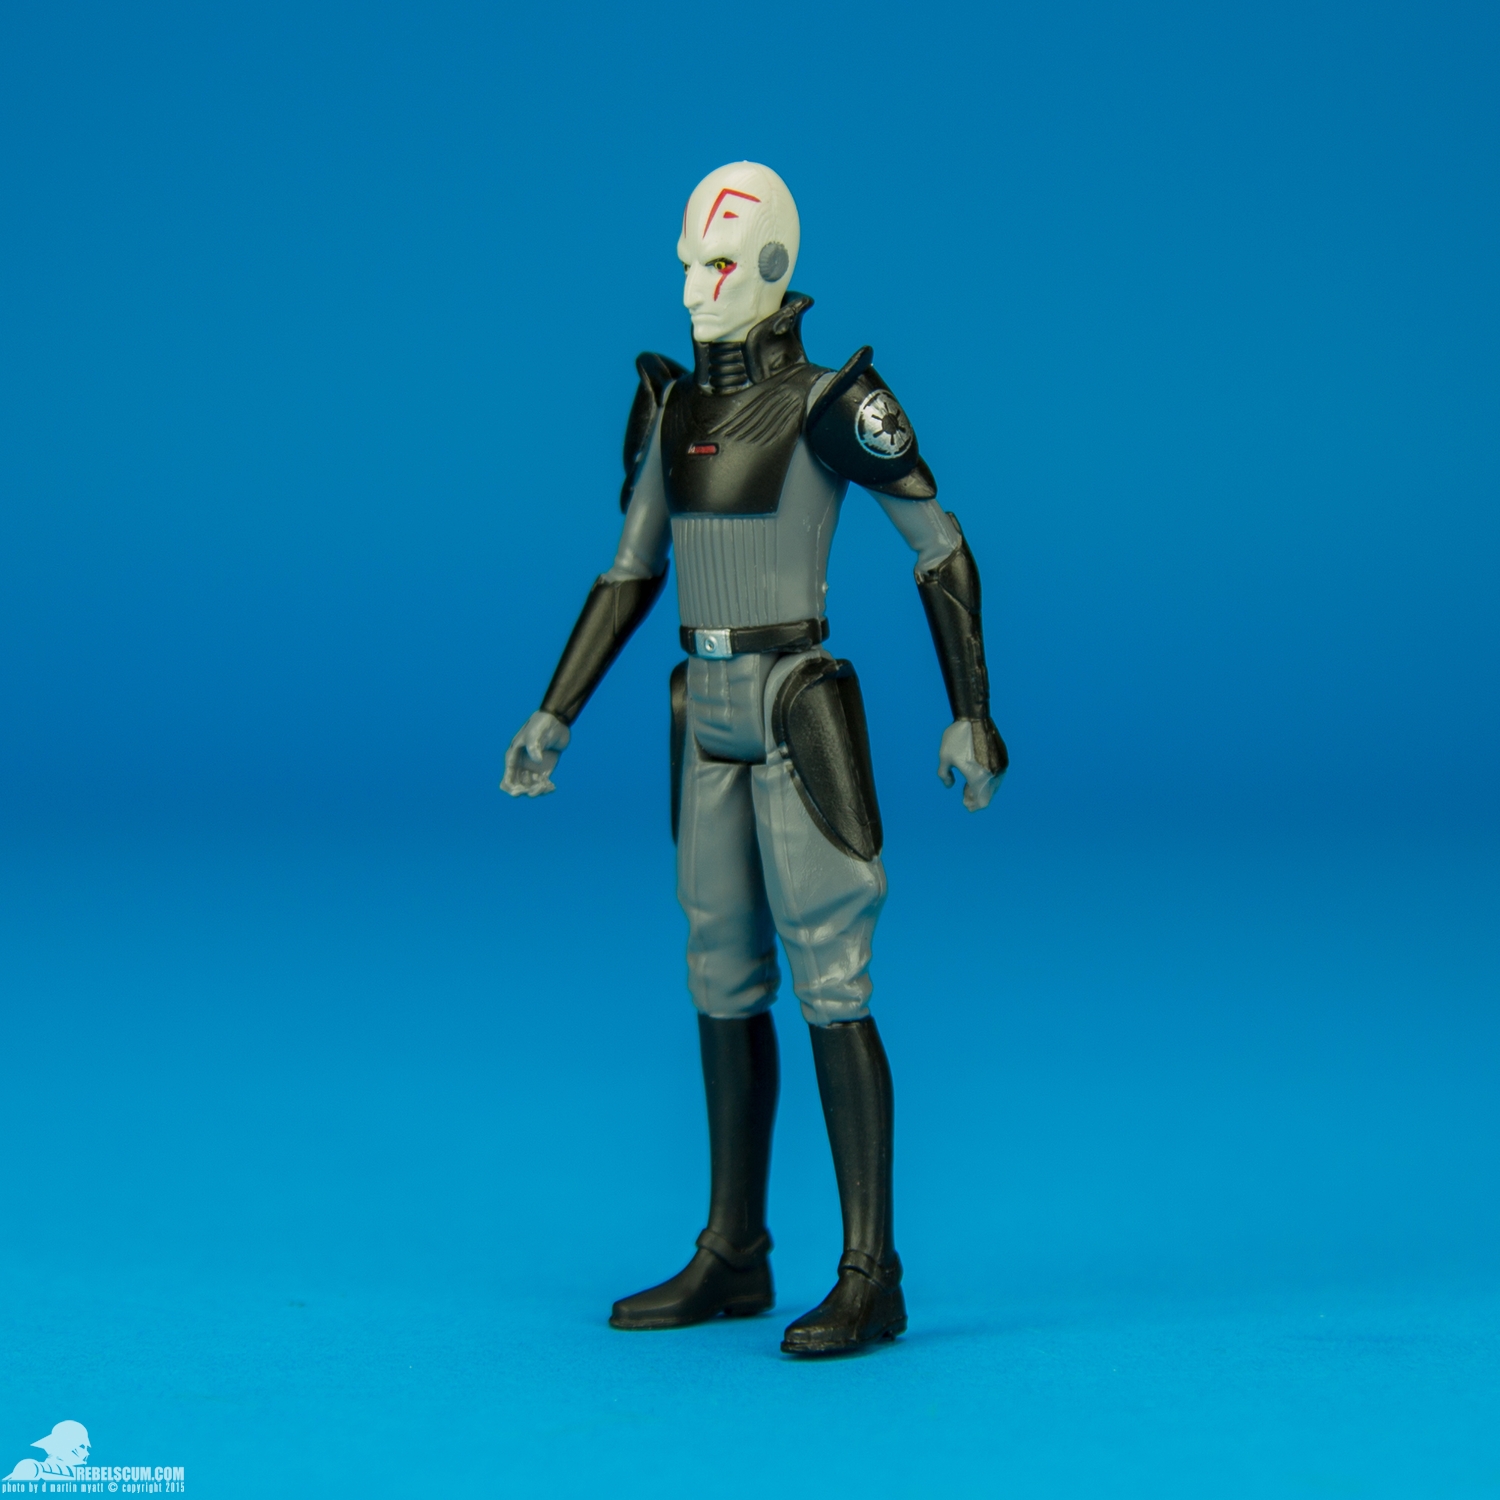 The-Inquisitor-Star-Wars-The-Force-Awakens-003.jpg